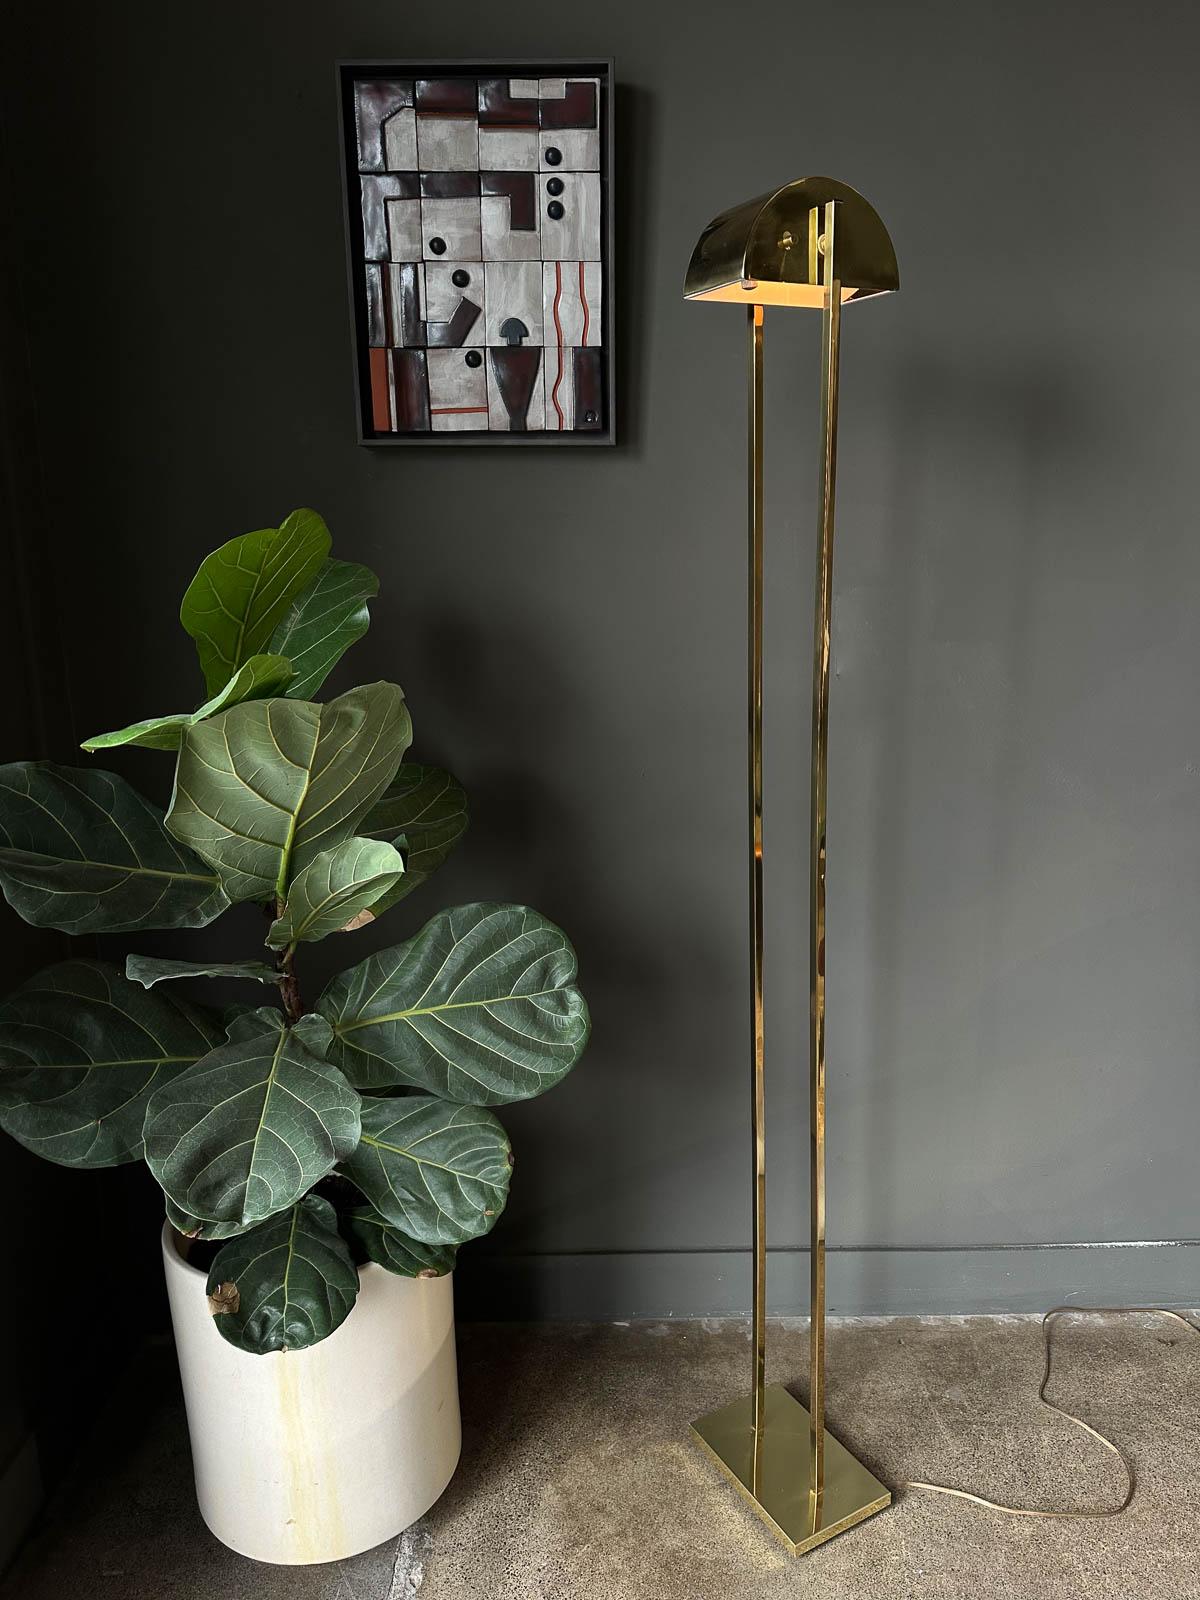 Brass Demilune floor lamp by George Kovacs for Koch + Lowy, 1970. Very good original condition with original wiring. Adjustable dimmer switch and beautiful brass finish with no rust or visible patina. Shade pivots to direct light where you desire.